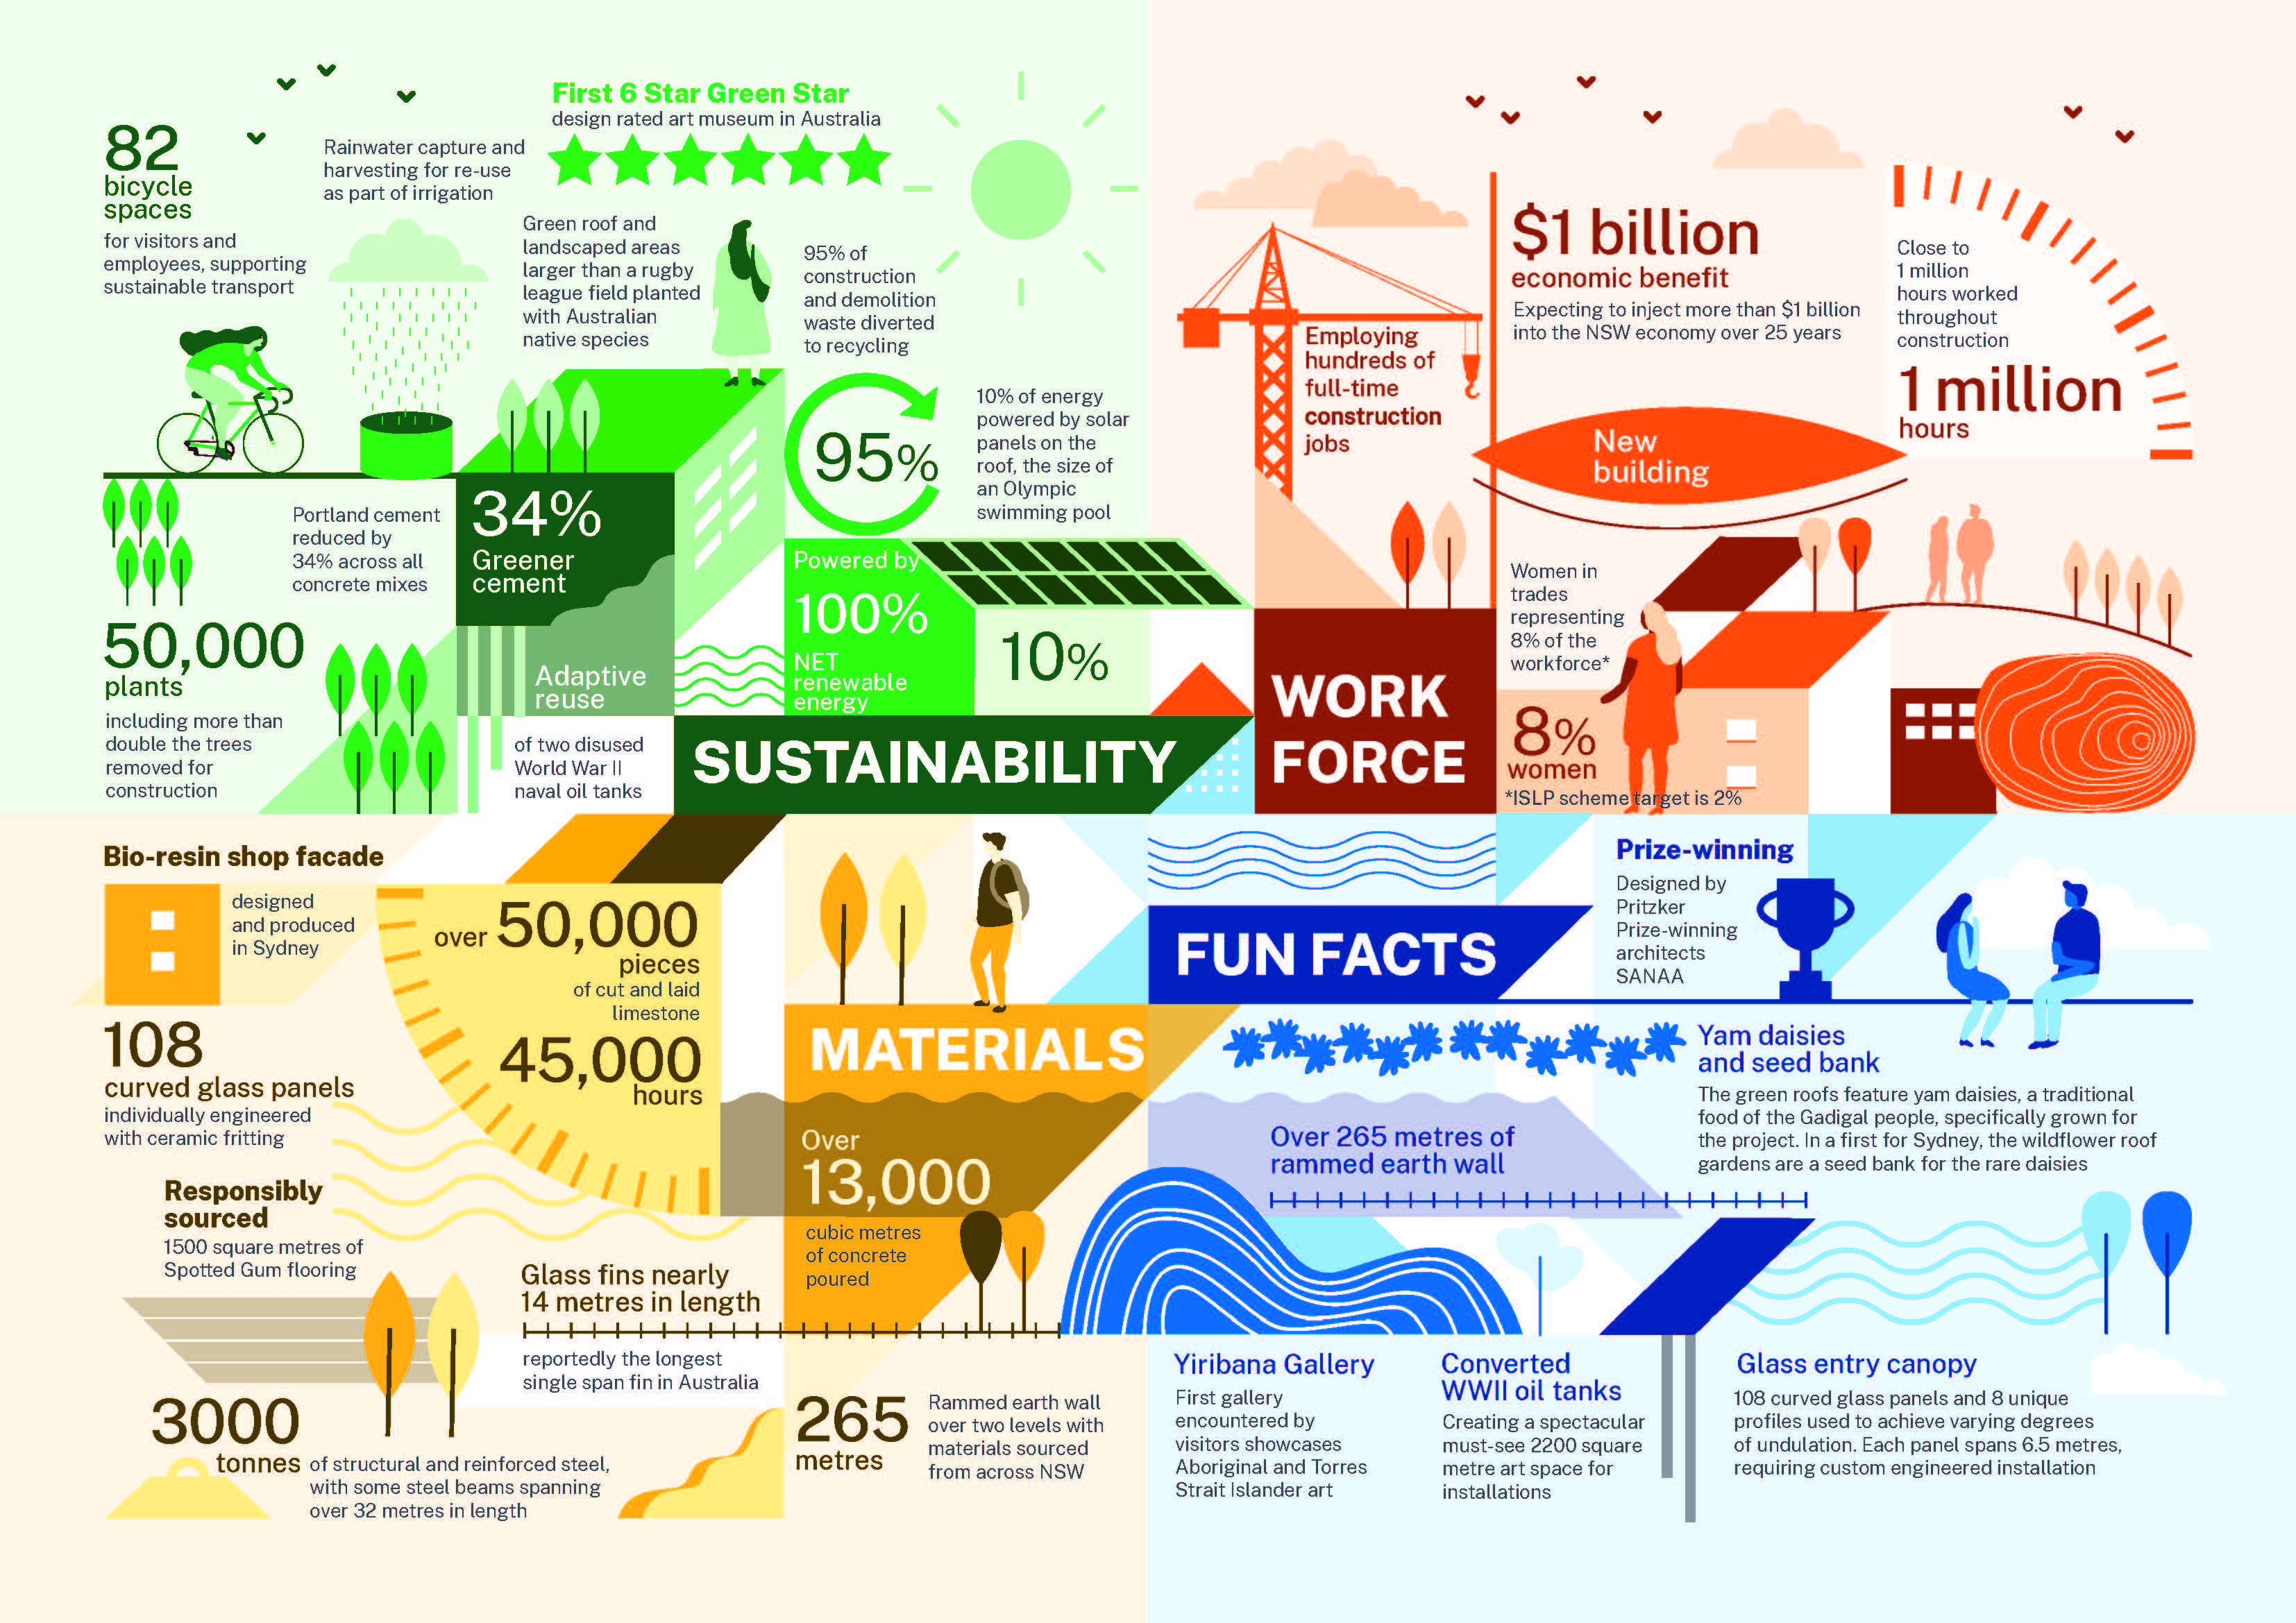 Sustainability, workforce and materials fun facts infographic